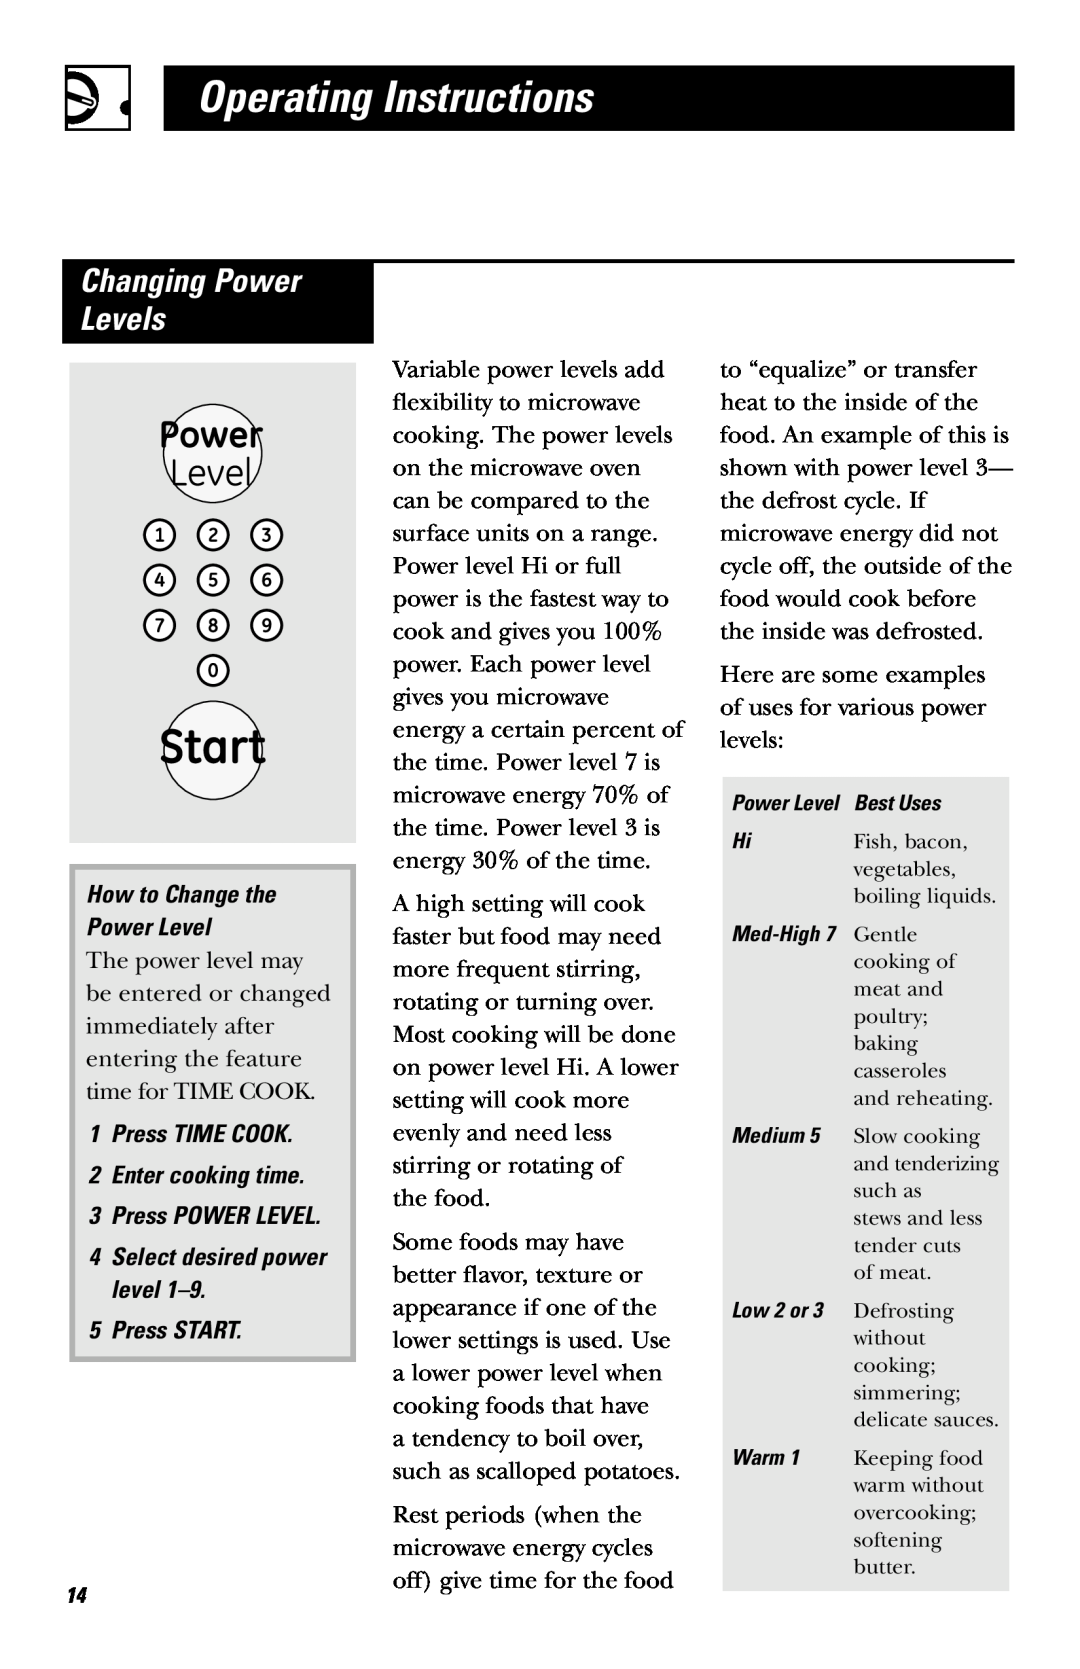 Frigidaire JE740 Changing Power Levels, Operating Instructions, How to Change the Power Level, 3Press POWER LEVEL 